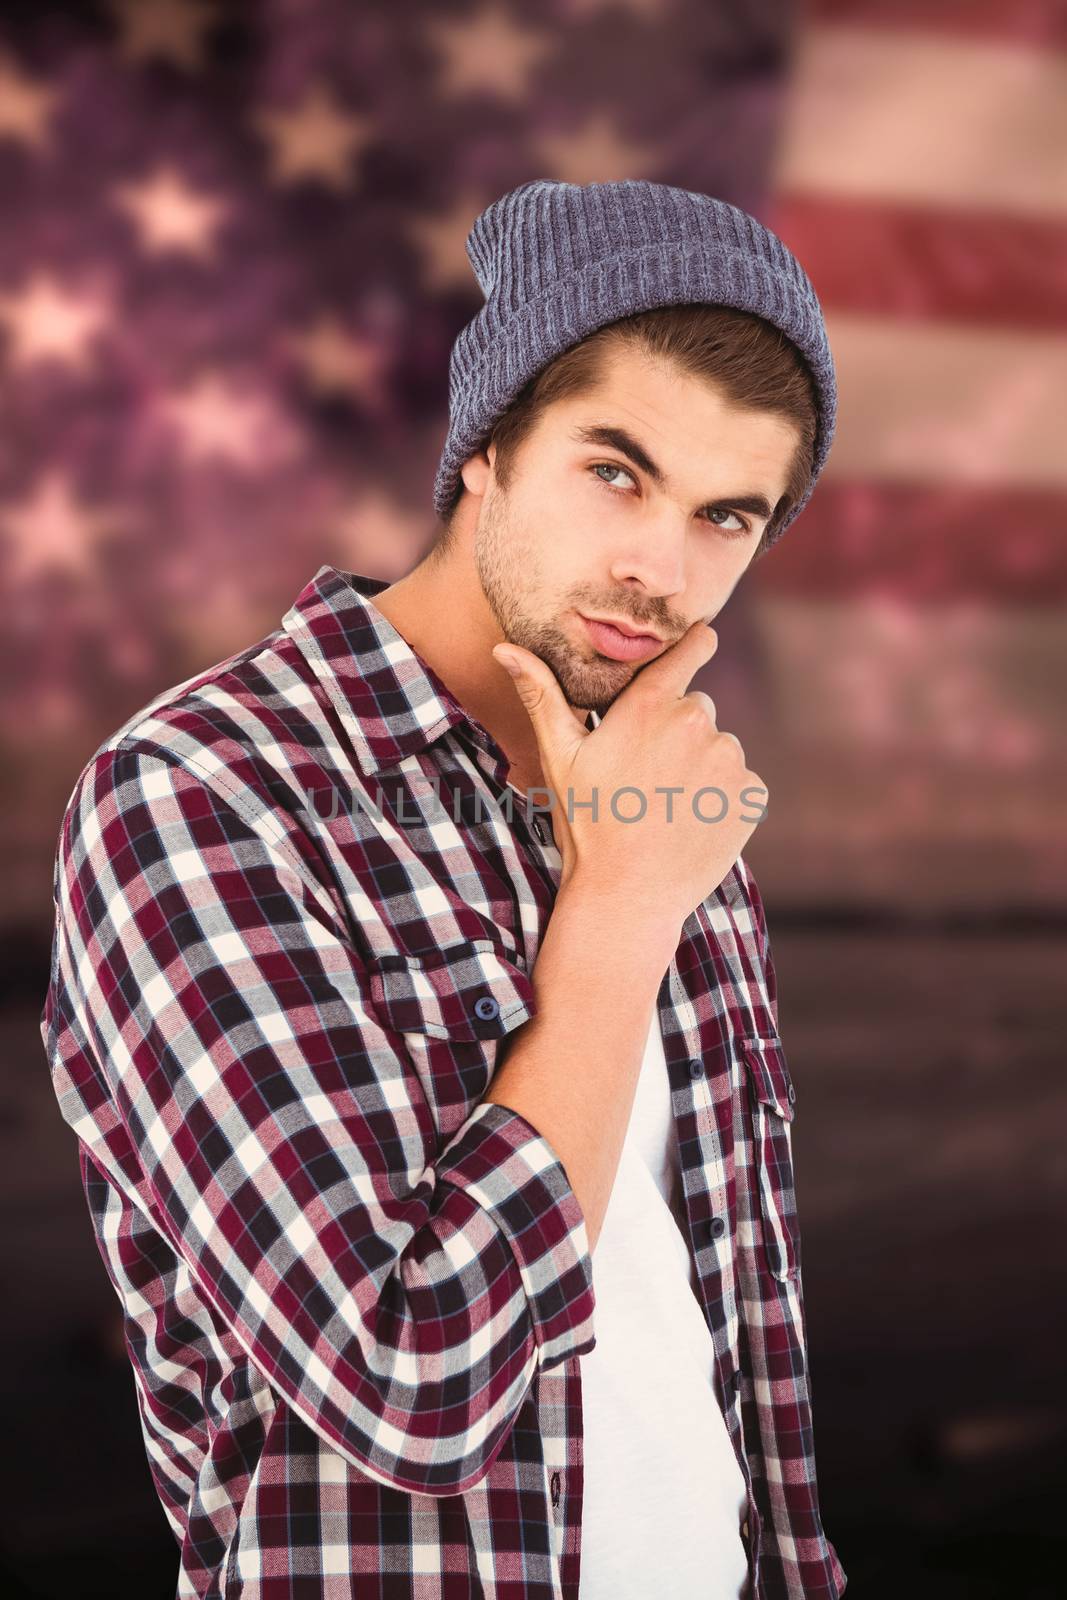 Composite image of thoughtful man against white background by Wavebreakmedia